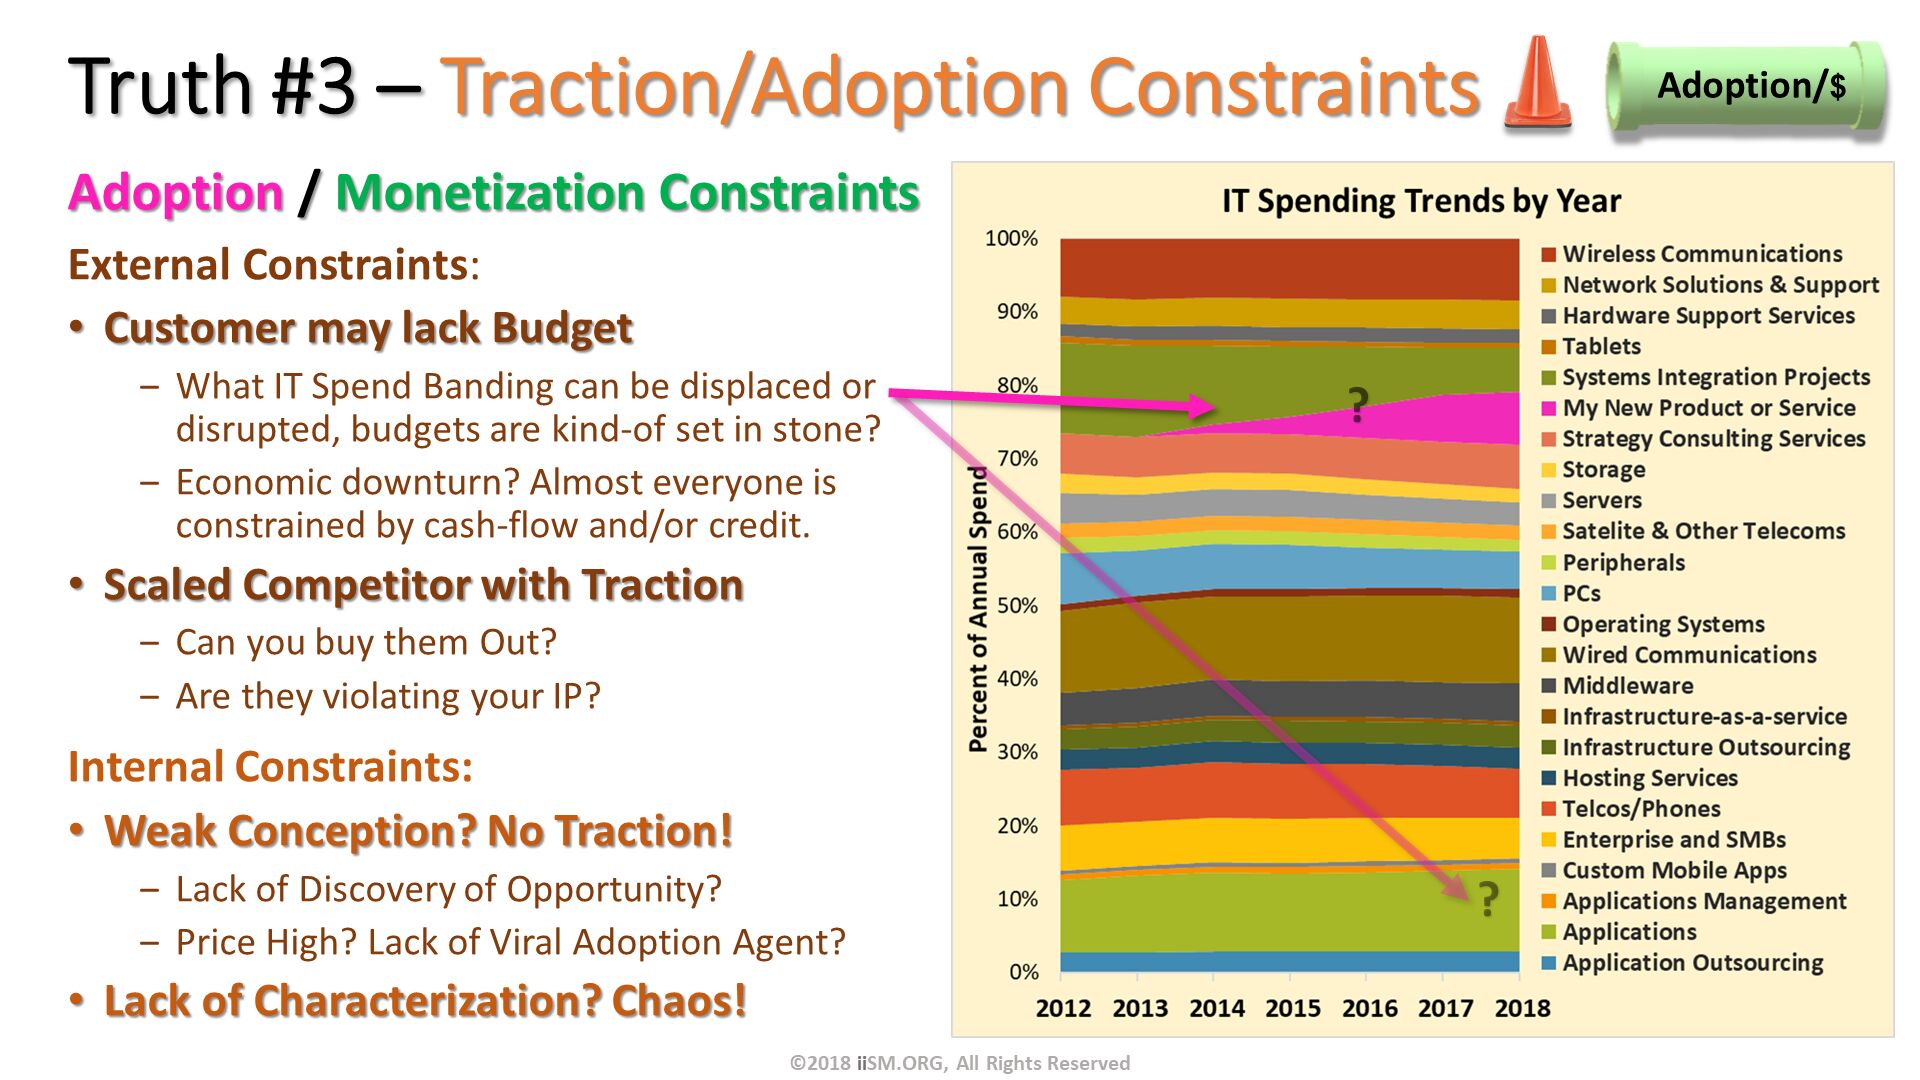 Truth #3 – Traction/Adoption Constraints . Adoption / Monetization Constraints
External Constraints:
Customer may lack Budget 
What IT Spend Banding can be displaced or disrupted, budgets are kind-of set in stone?
Economic downturn? Almost everyone is constrained by cash-flow and/or credit.
Scaled Competitor with Traction
Can you buy them Out?
Are they violating your IP? 
Internal Constraints:
Weak Conception? No Traction!
Lack of Discovery of Opportunity?
Price High? Lack of Viral Adoption Agent? 
Lack of Characterization? Chaos!

. ?. ?. ©2018 iiSM.ORG, All Rights Reserved. 